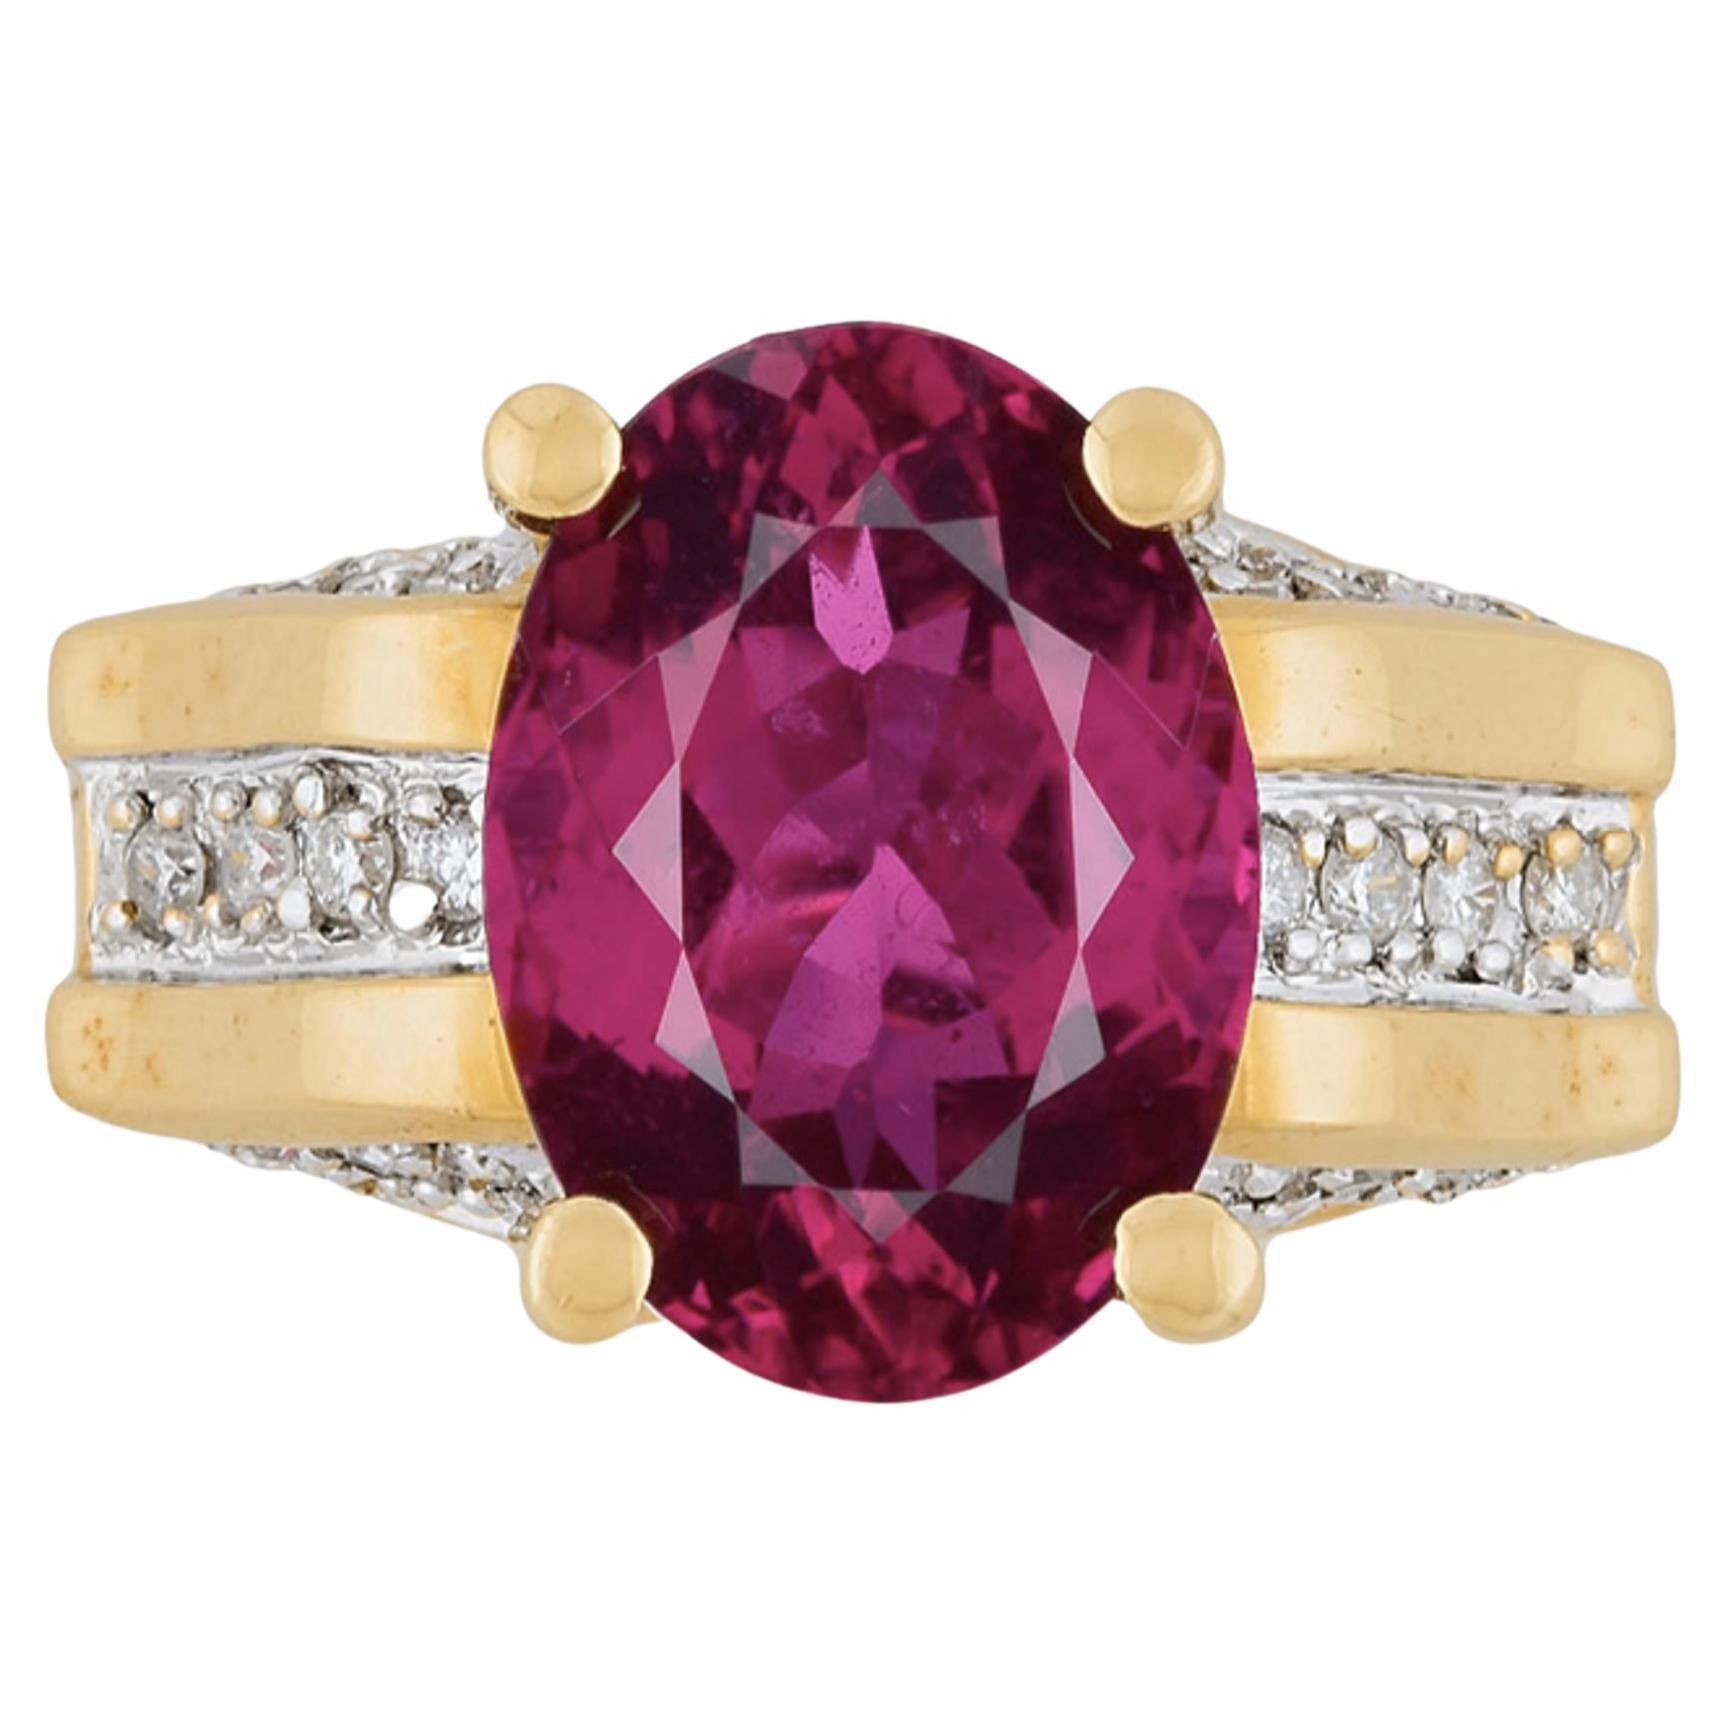 GIA Cert Oval Cut 7 Carat Purplish Red Tourmaline Ring with Diamond in 18K Gold For Sale